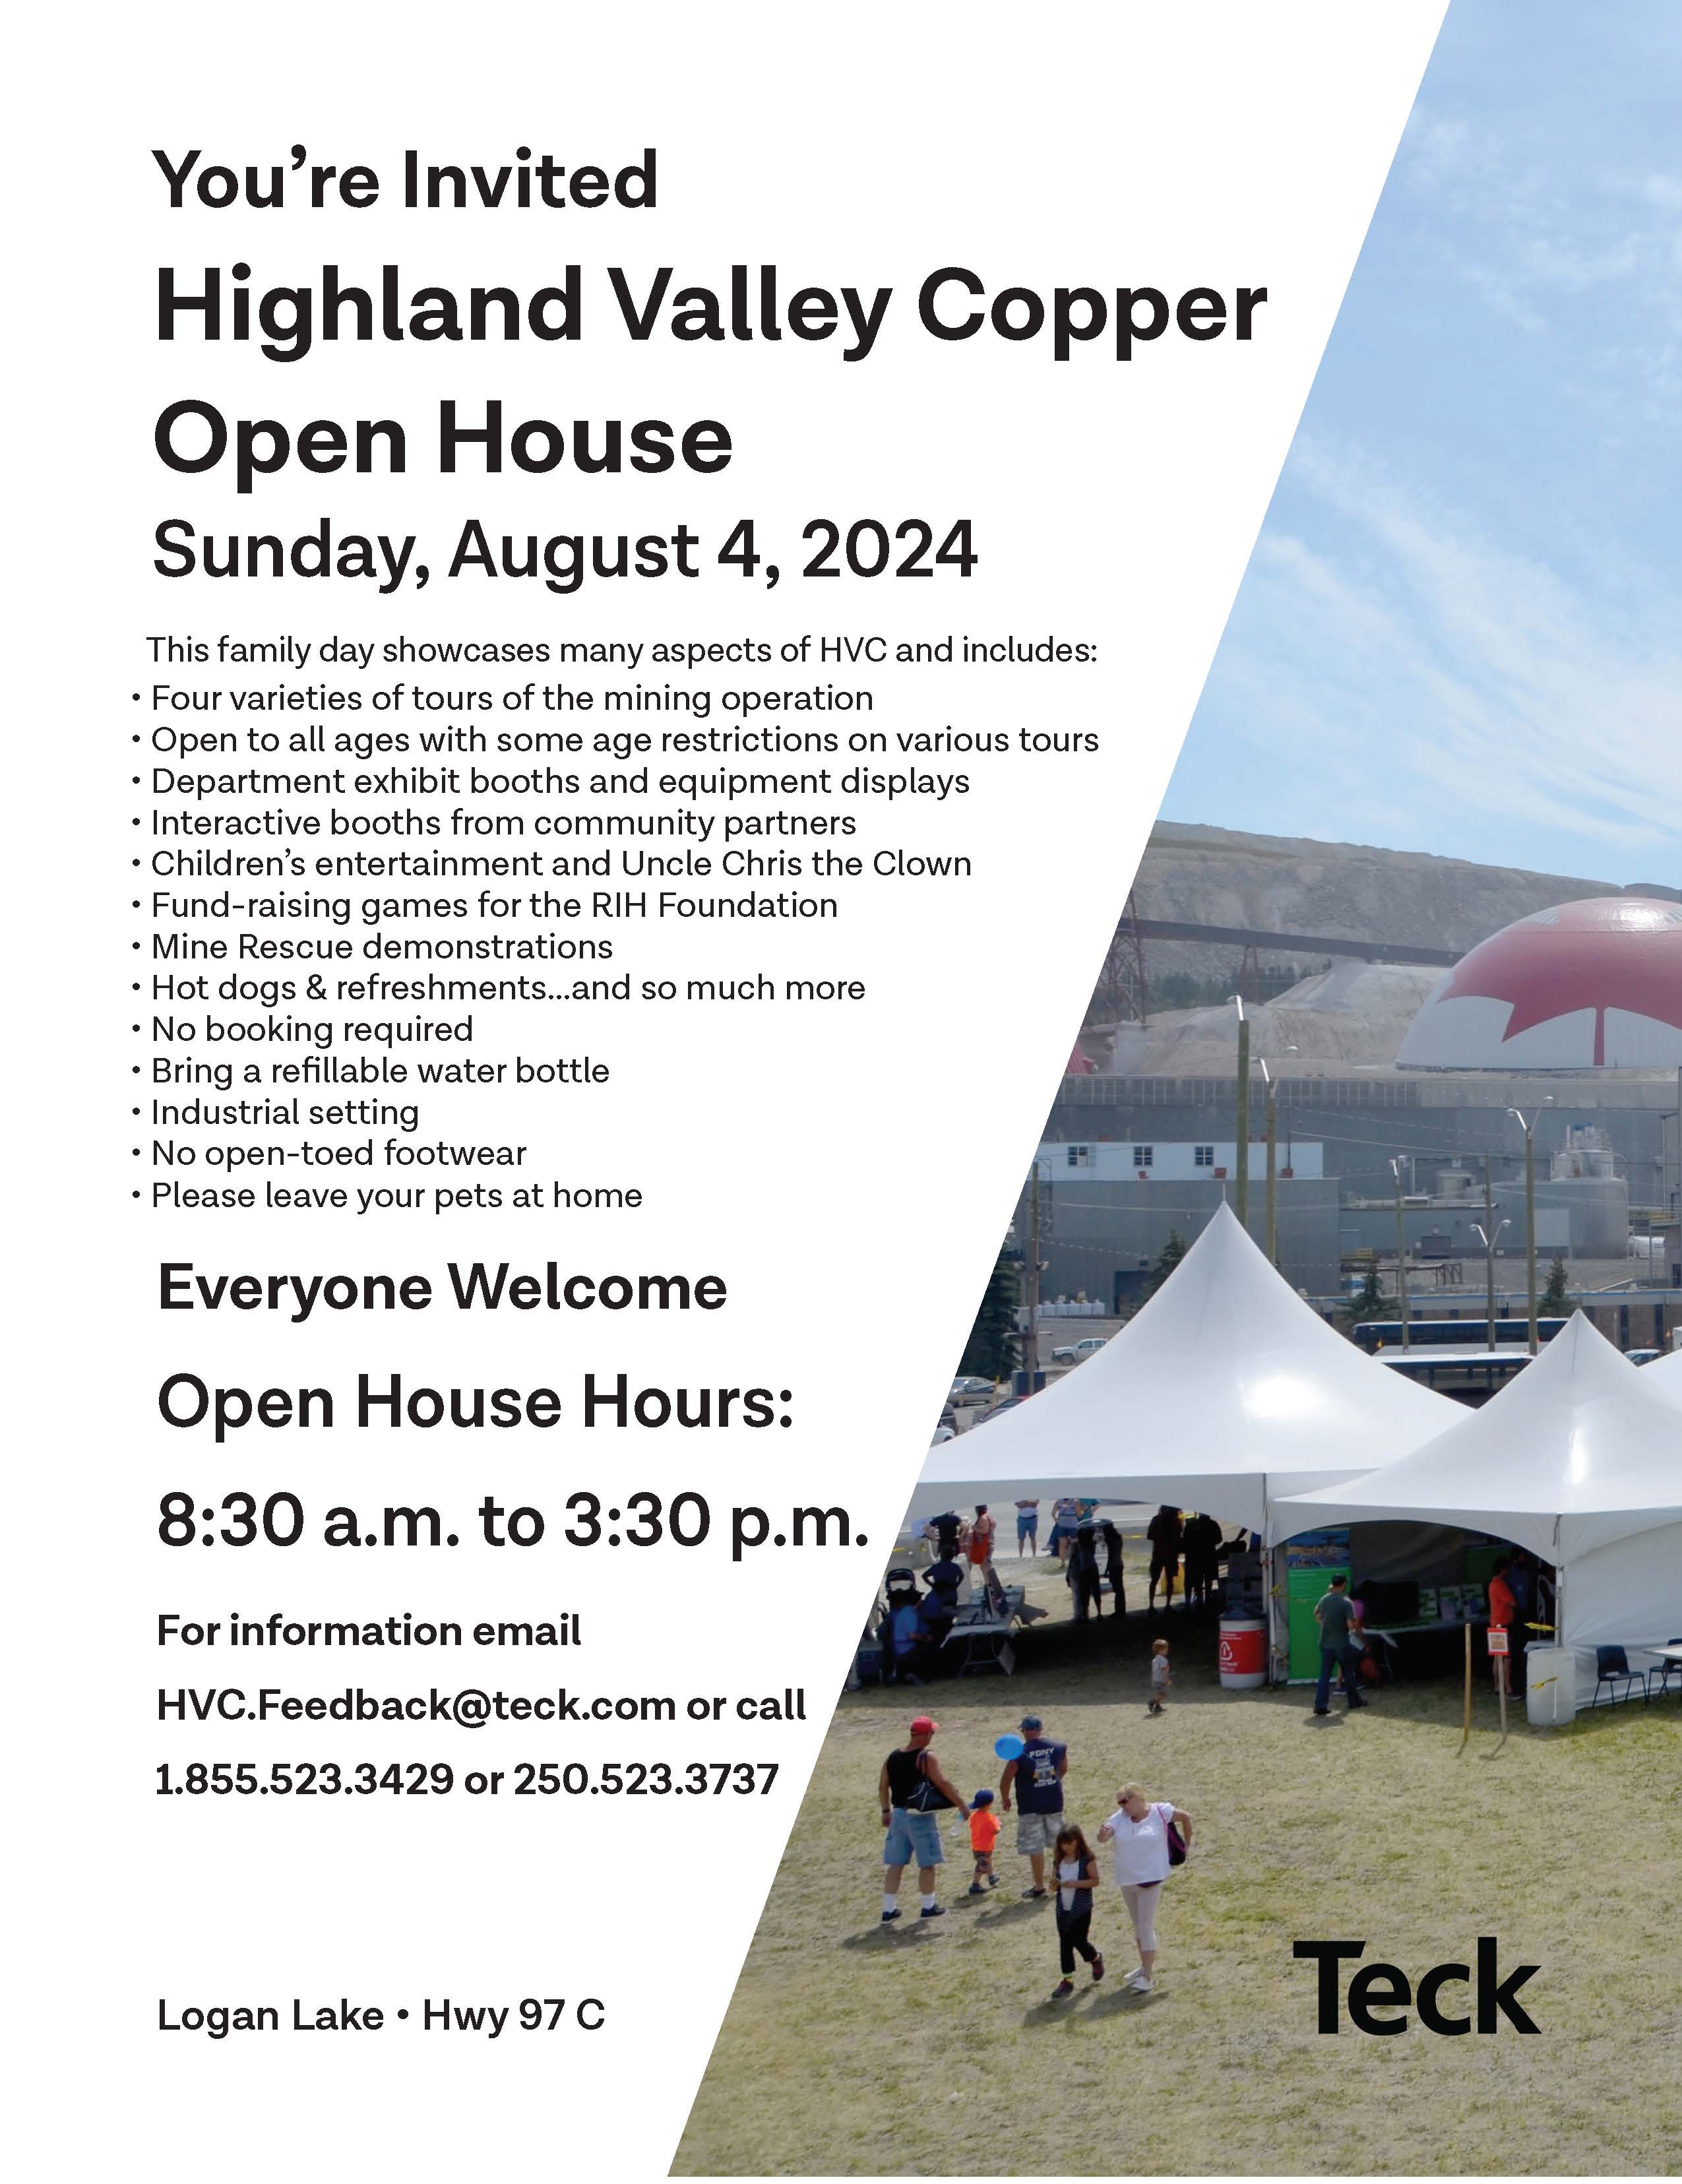 Highland Valley Copper Open House